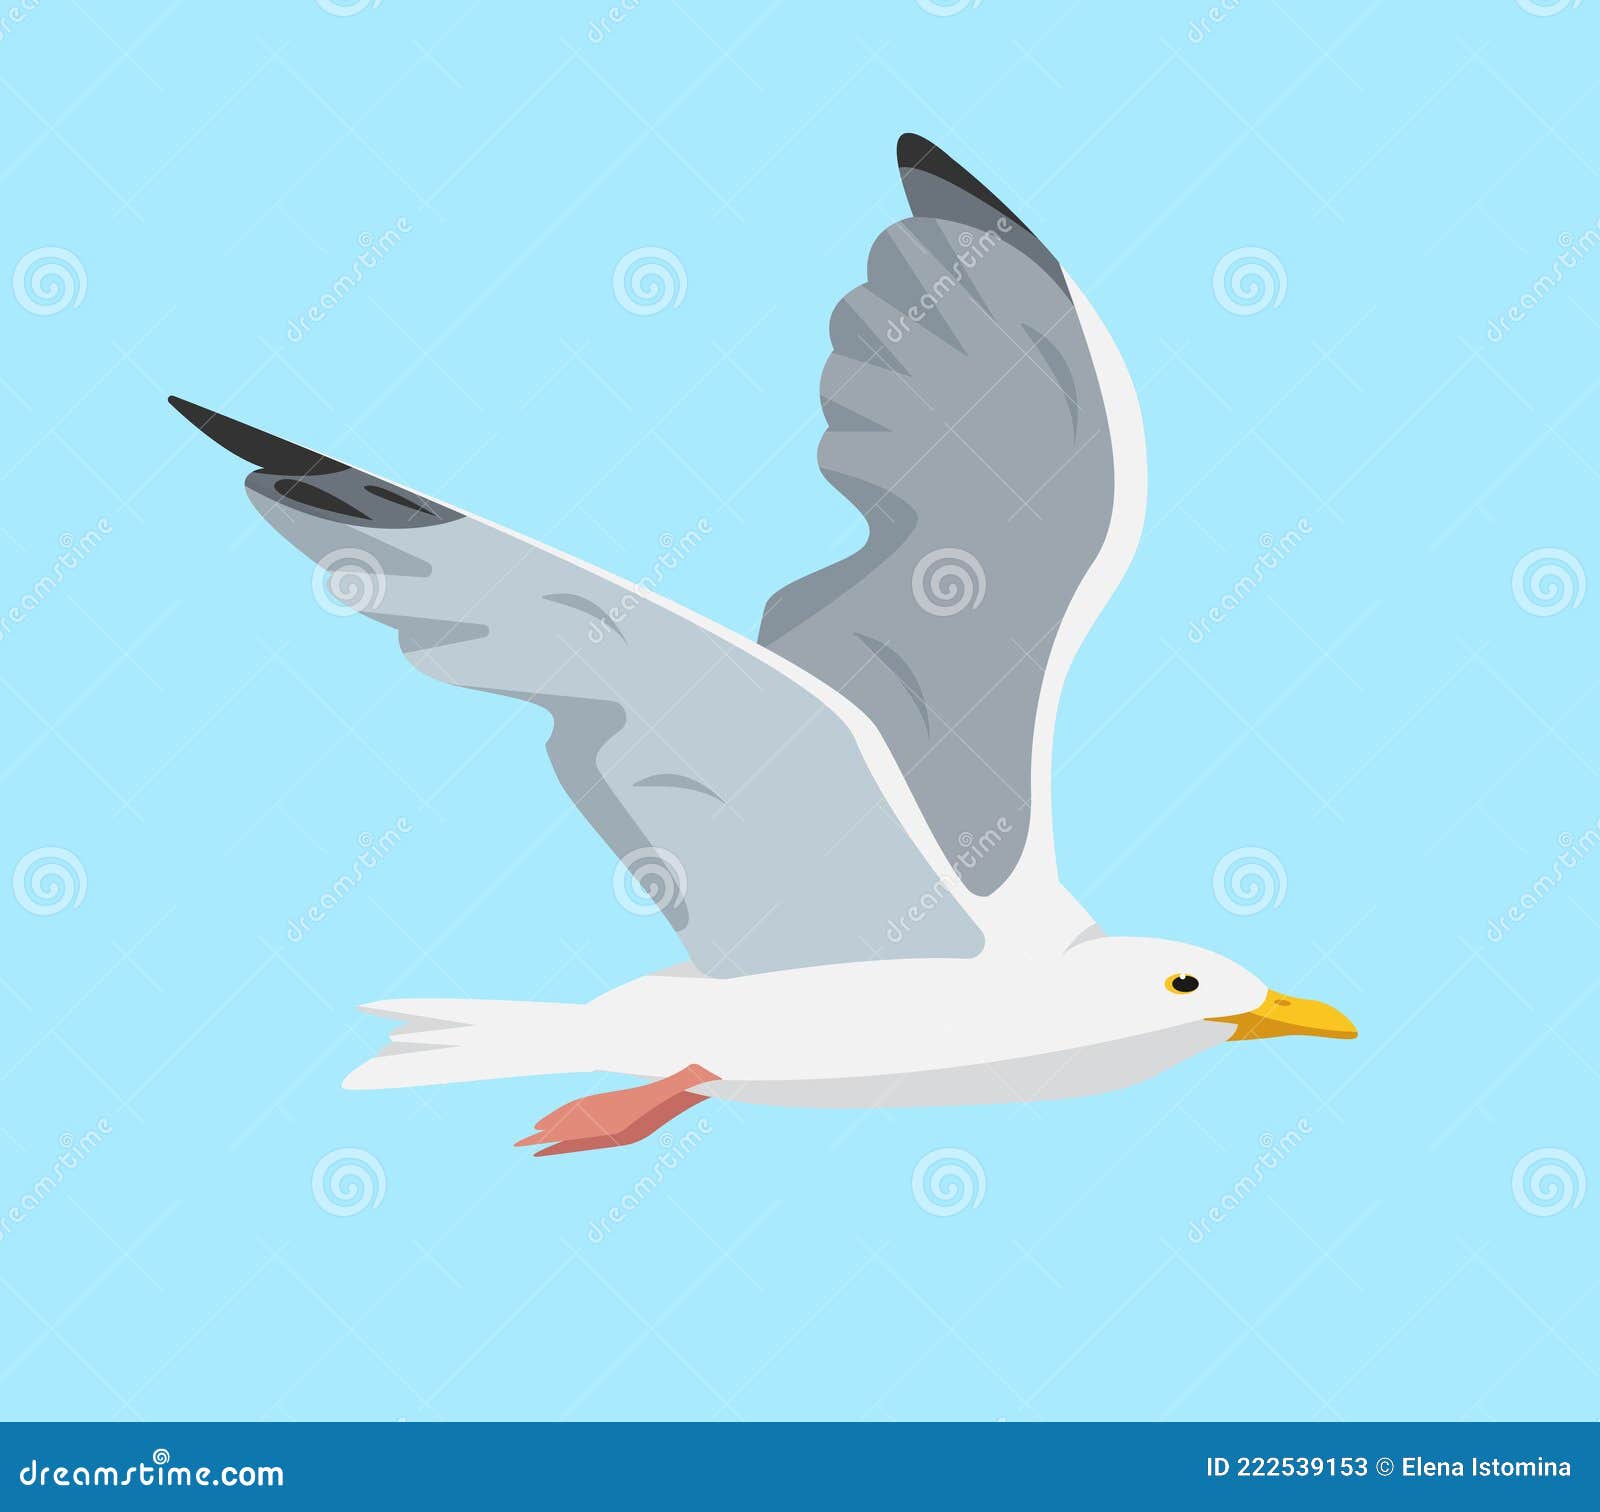 white and gray flying seagull in sky.